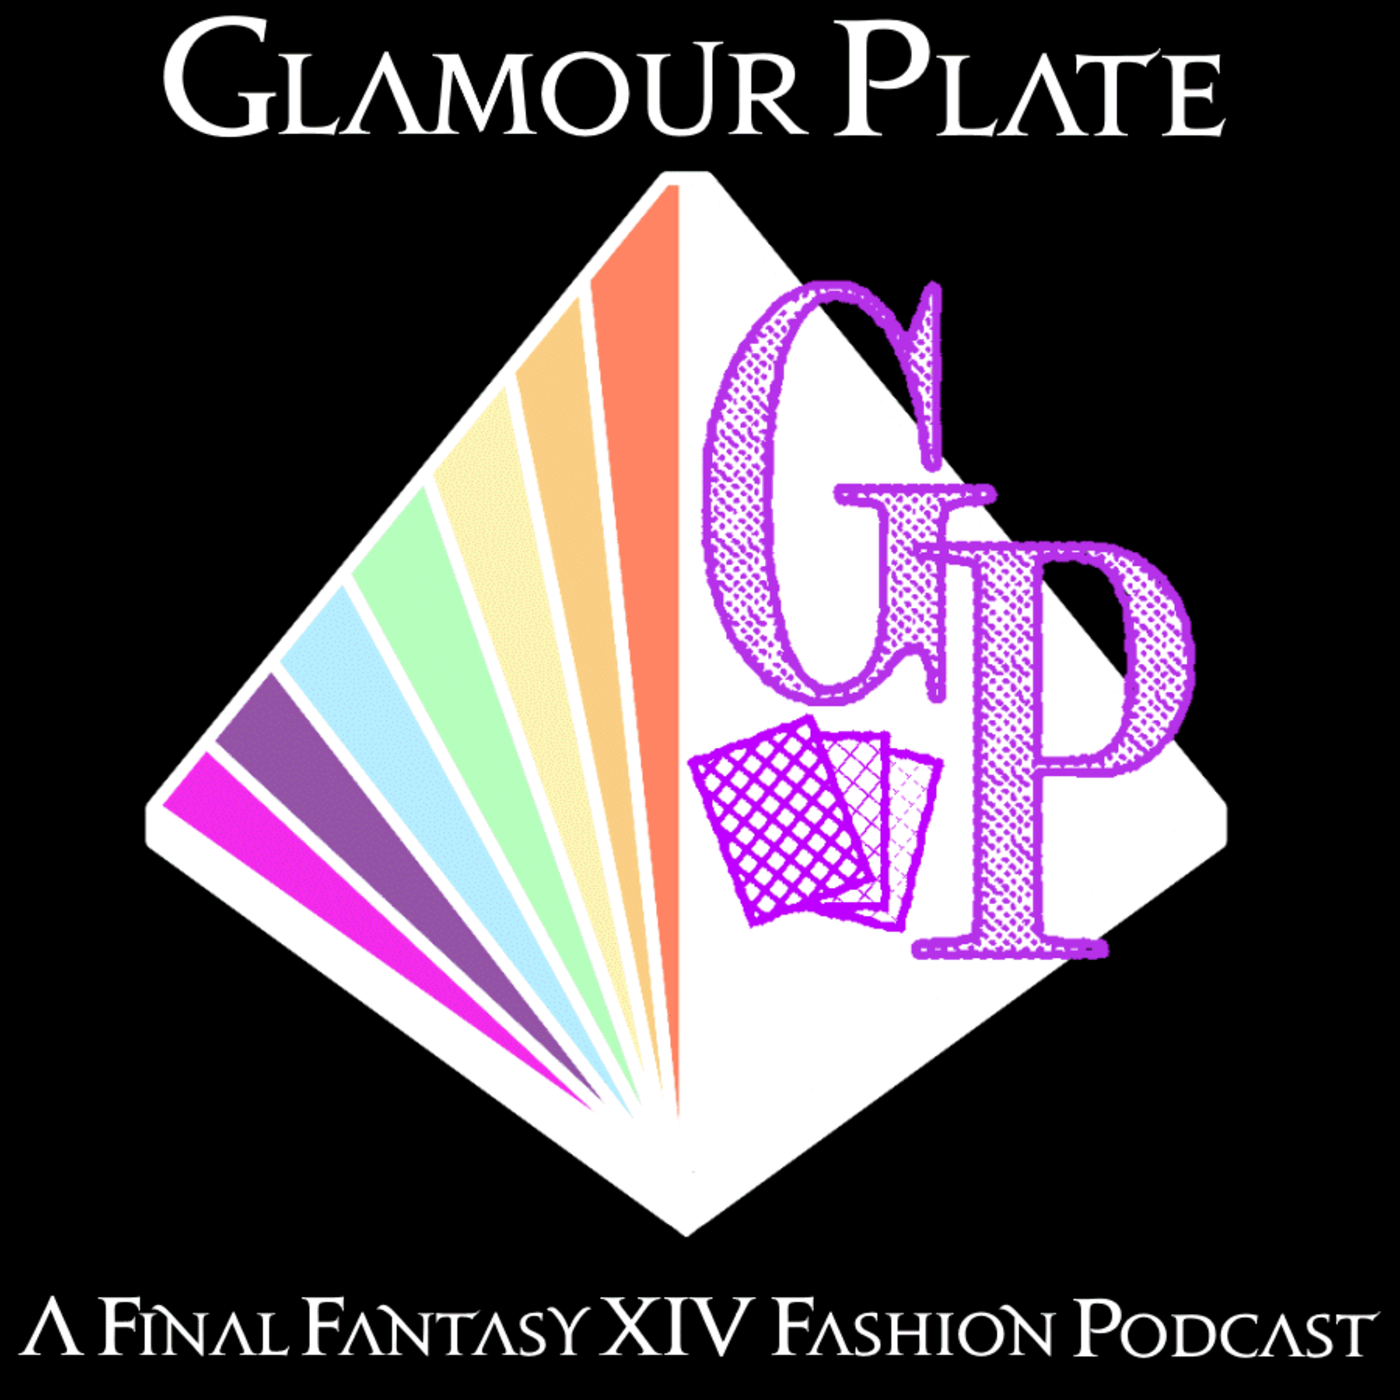 Glamour Plate